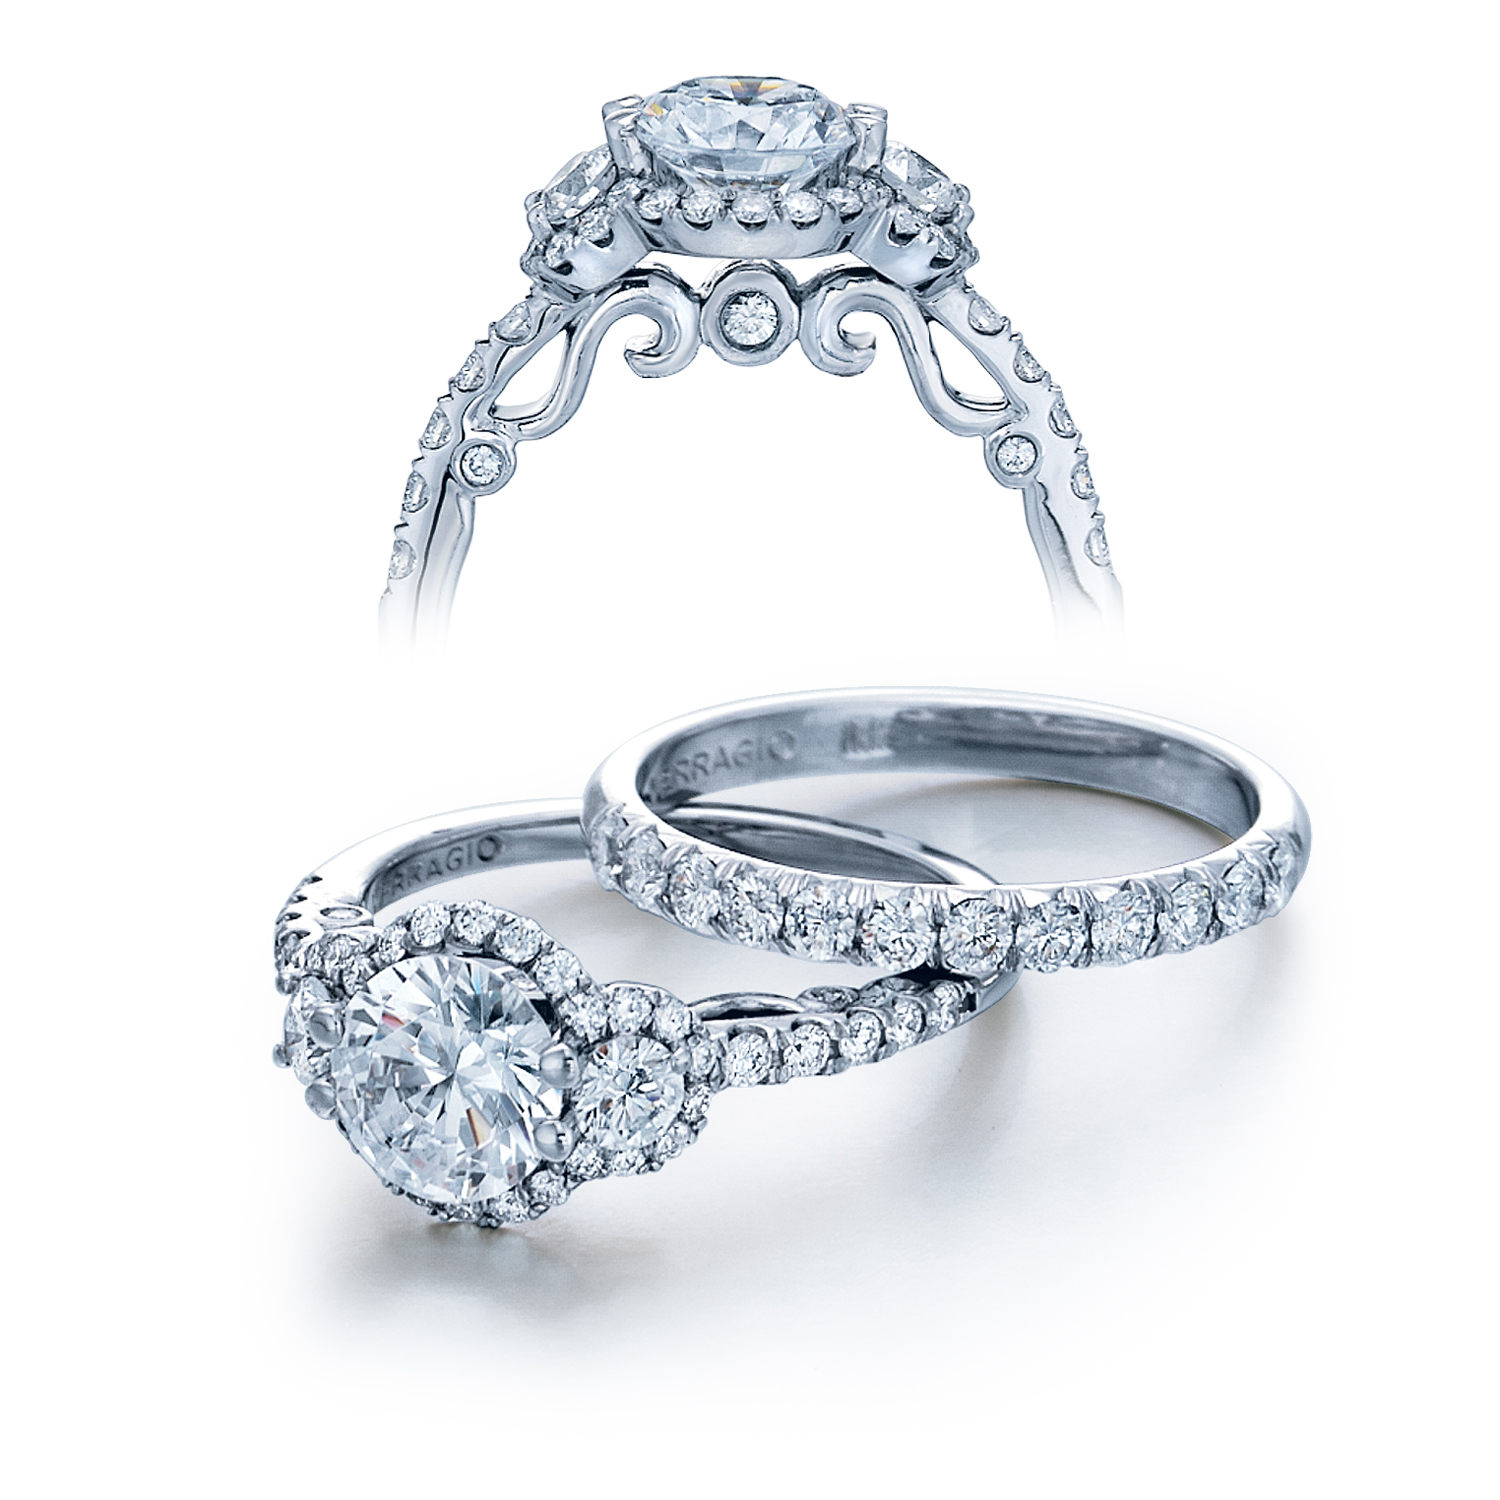 You are Viewing this Stunning Verragio Diamond Engagement Ring Mounting!